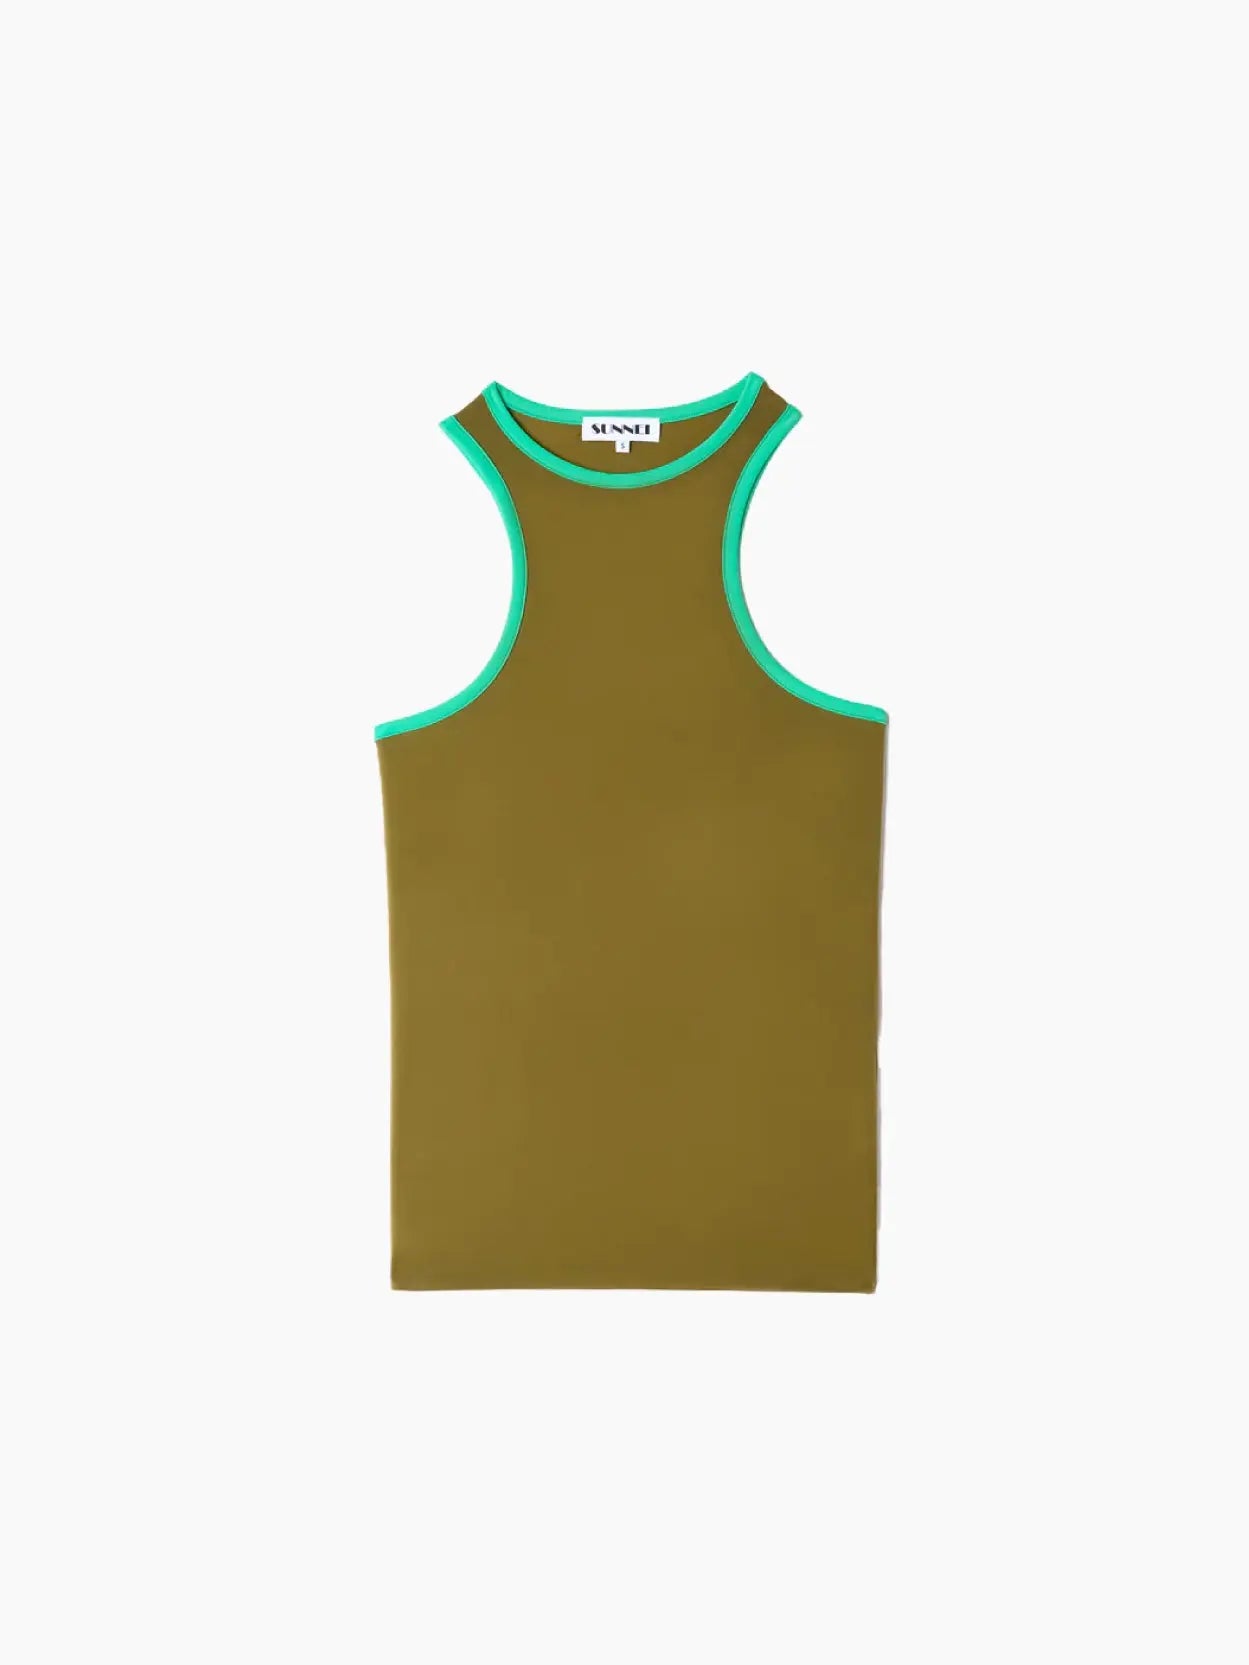 A sleeveless, brown tank top with green trim around the armholes and neckline. The tag at the collar reads "SUNNEI" in black text. The Stretchy Halter Top Olive Green is available at Bassalstore in Barcelona against a clean white background.